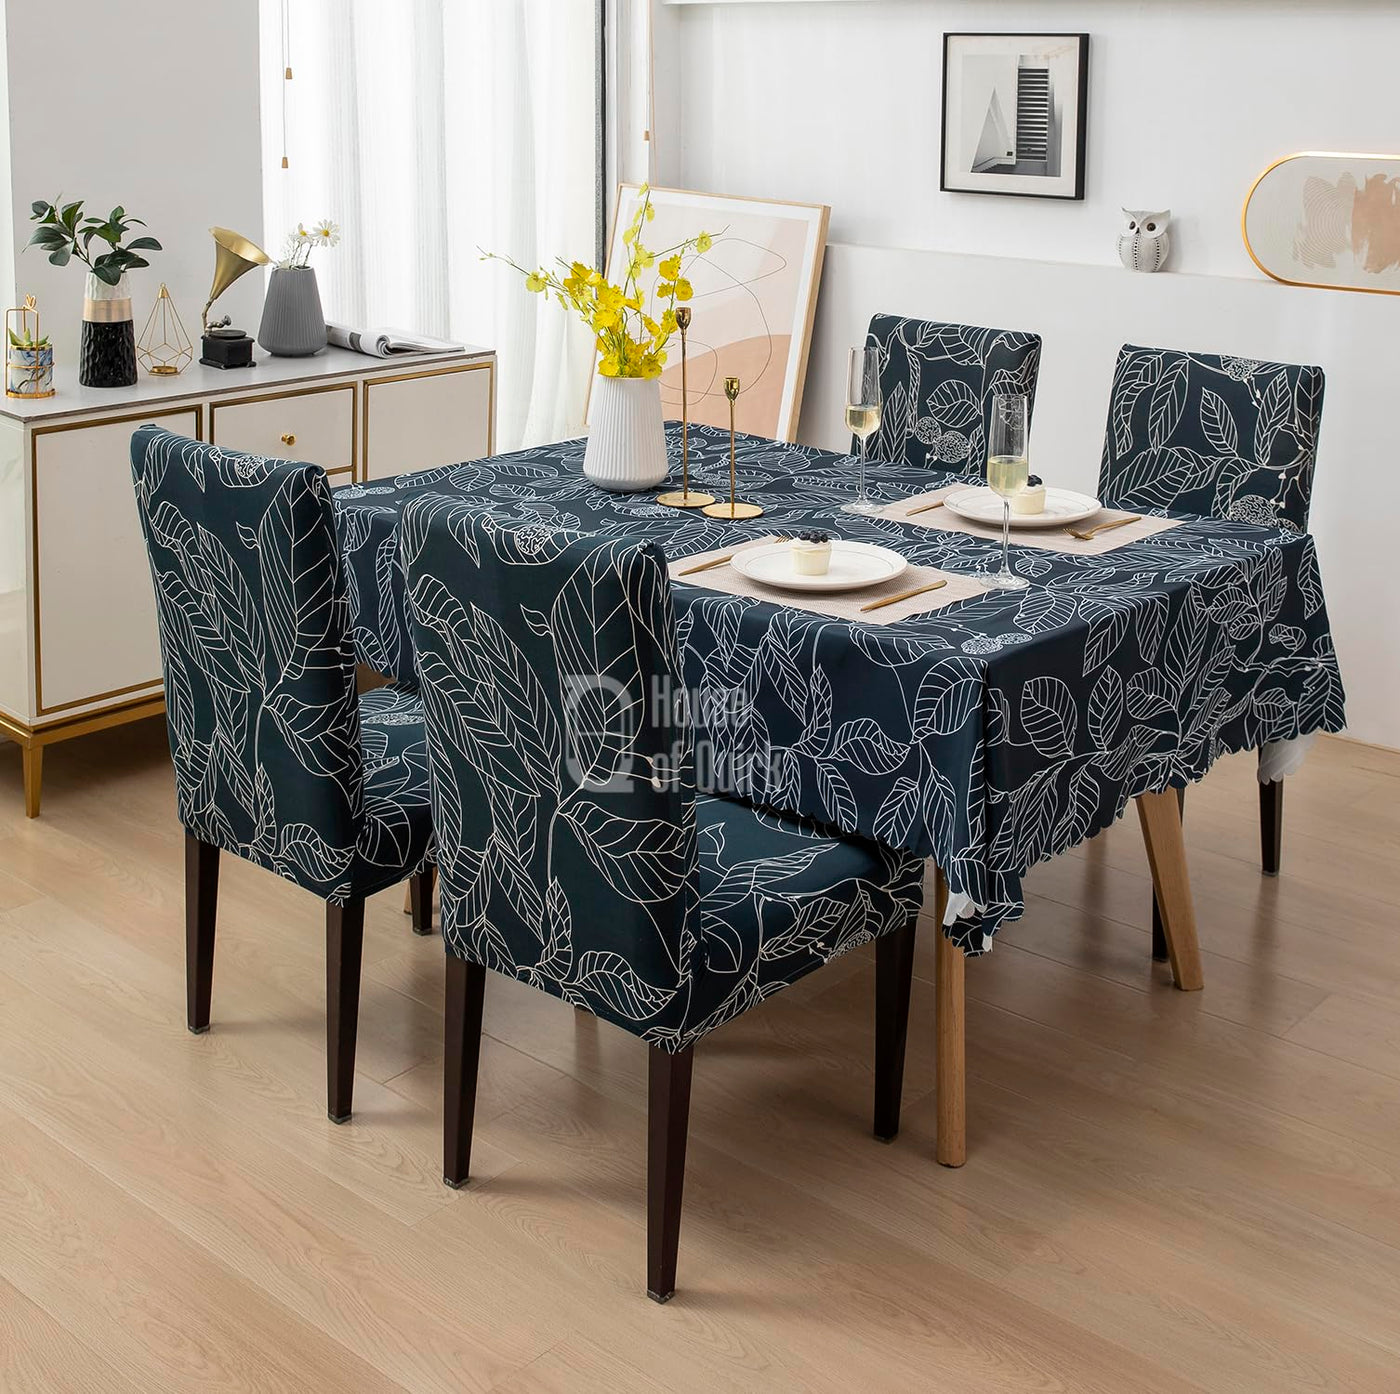 Dining Table Cover (1 Table Cover + 6 Chair Cover)